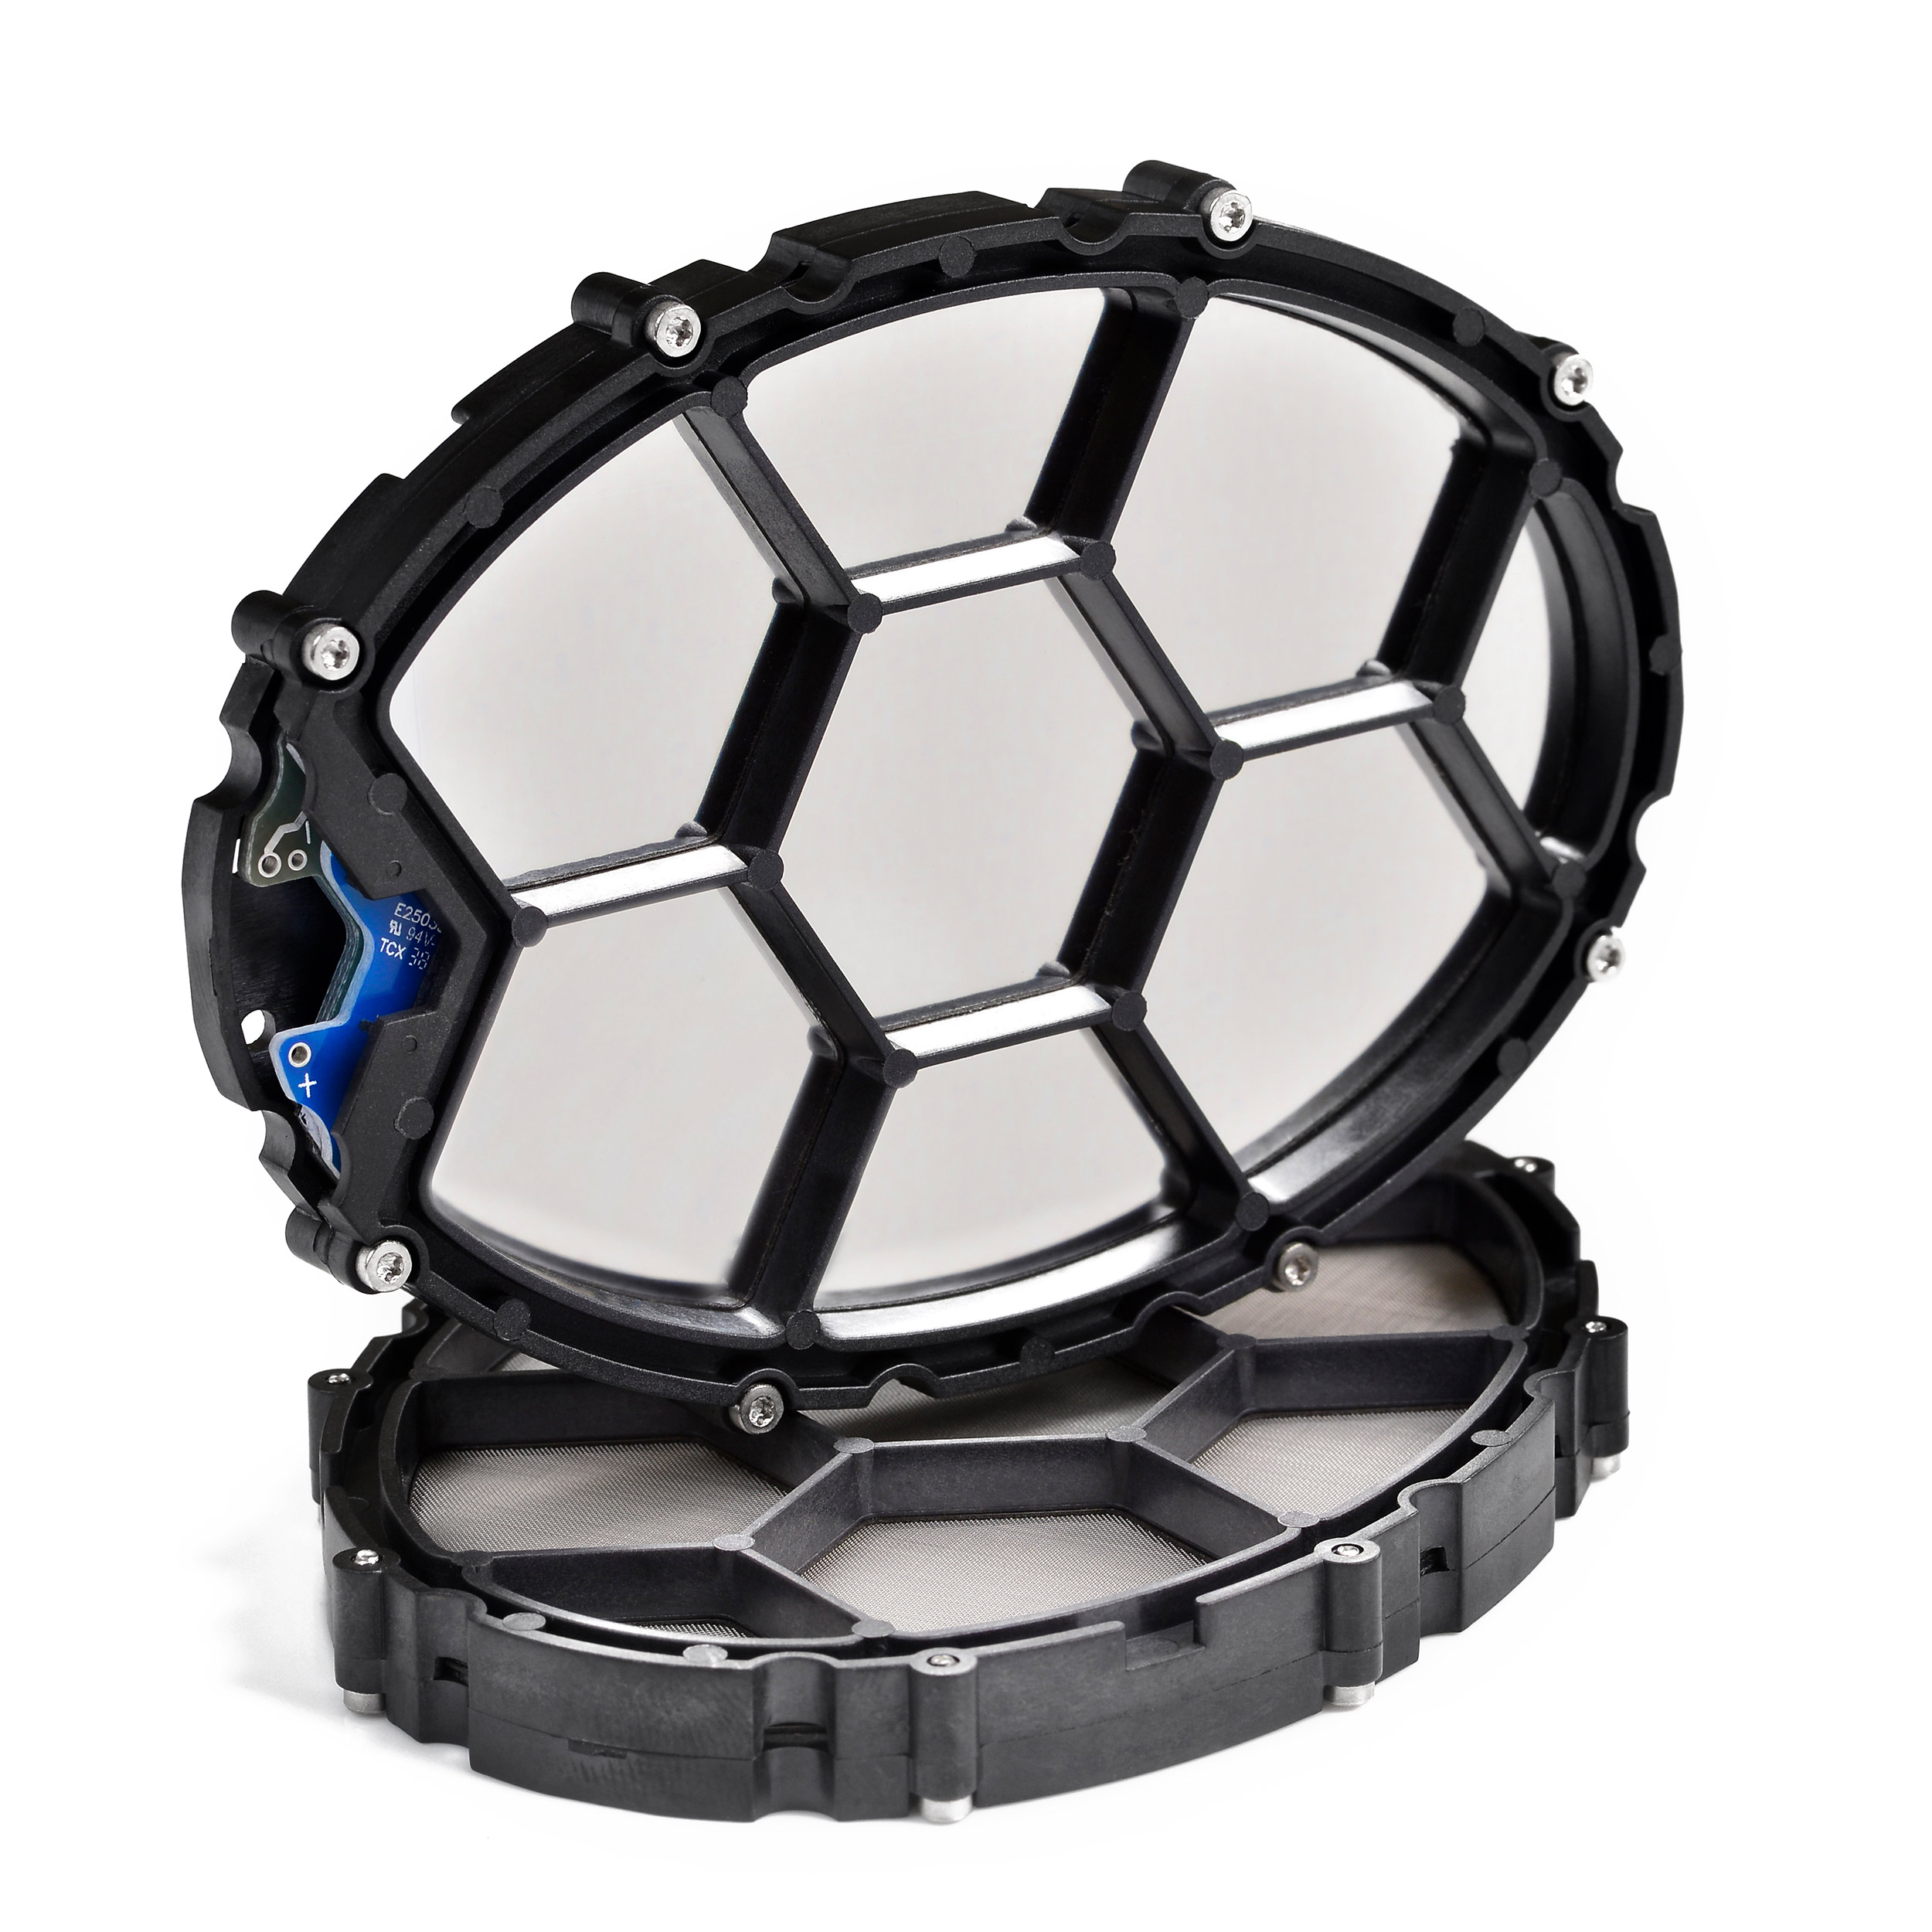 The HPEL Transducer has an oval shaped frame with a honeycomb infrastructure